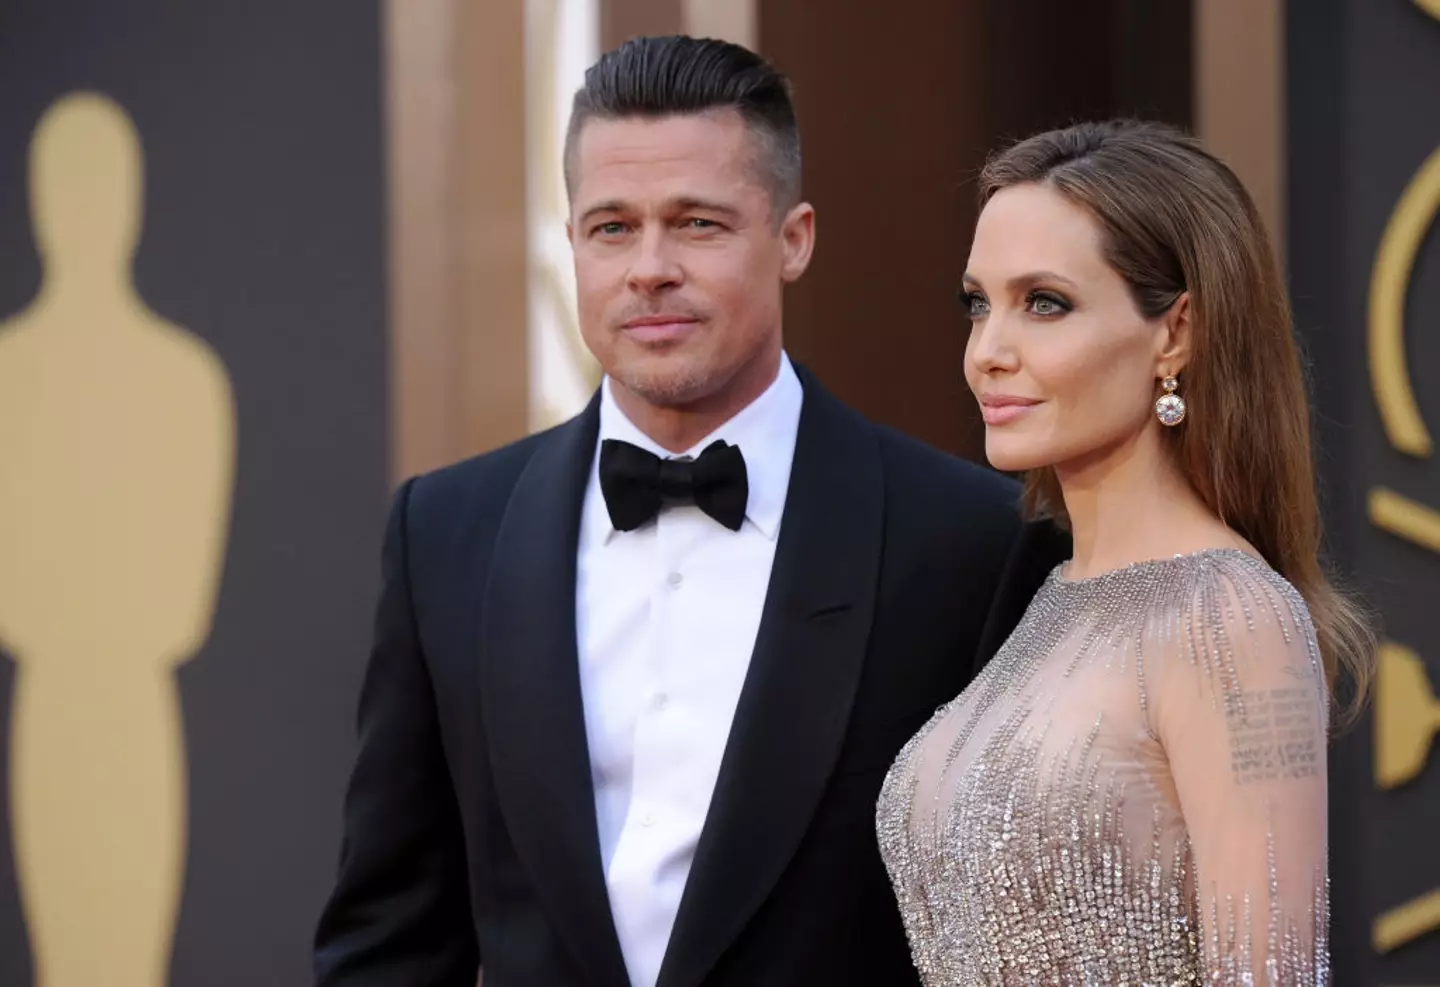 Brad Pitt and Angelina Jolie have been locked in a messy legal battle since the breakdown of their relationship in 2016. (Axelle/Bauer-Griffin/FilmMagic)